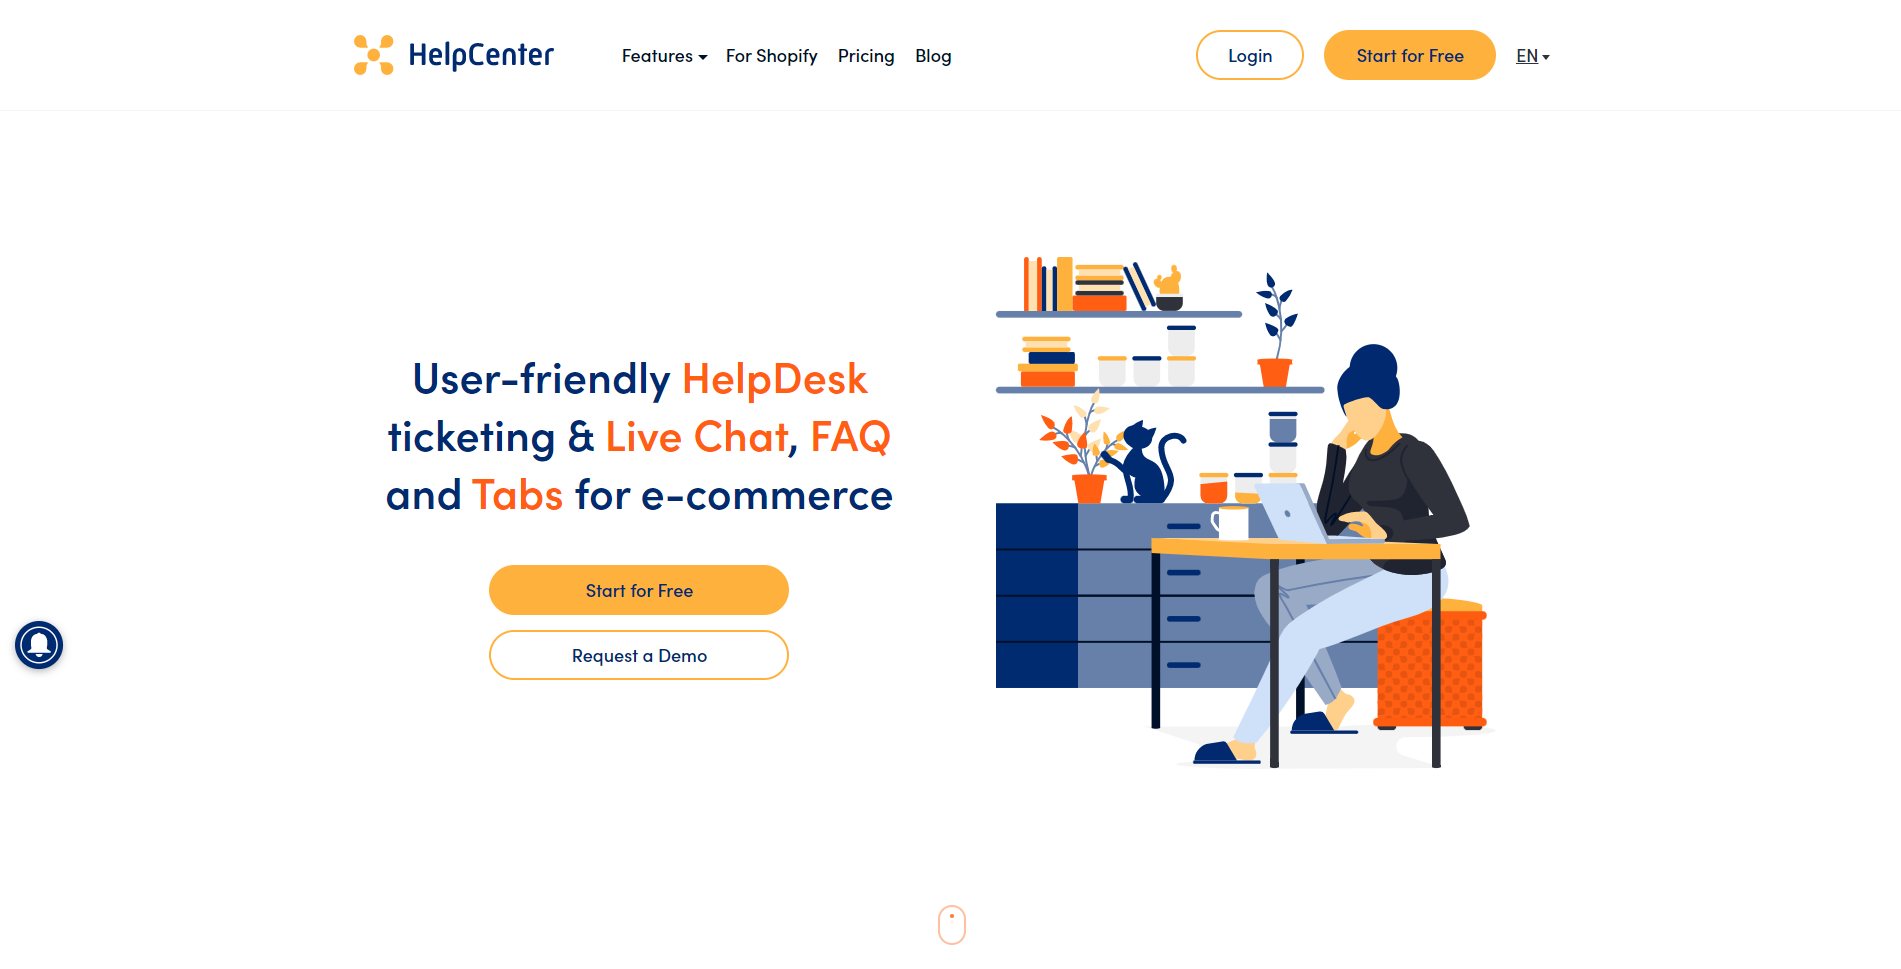 Customer service app for Shopify 2021 TOP rated HelpCenter